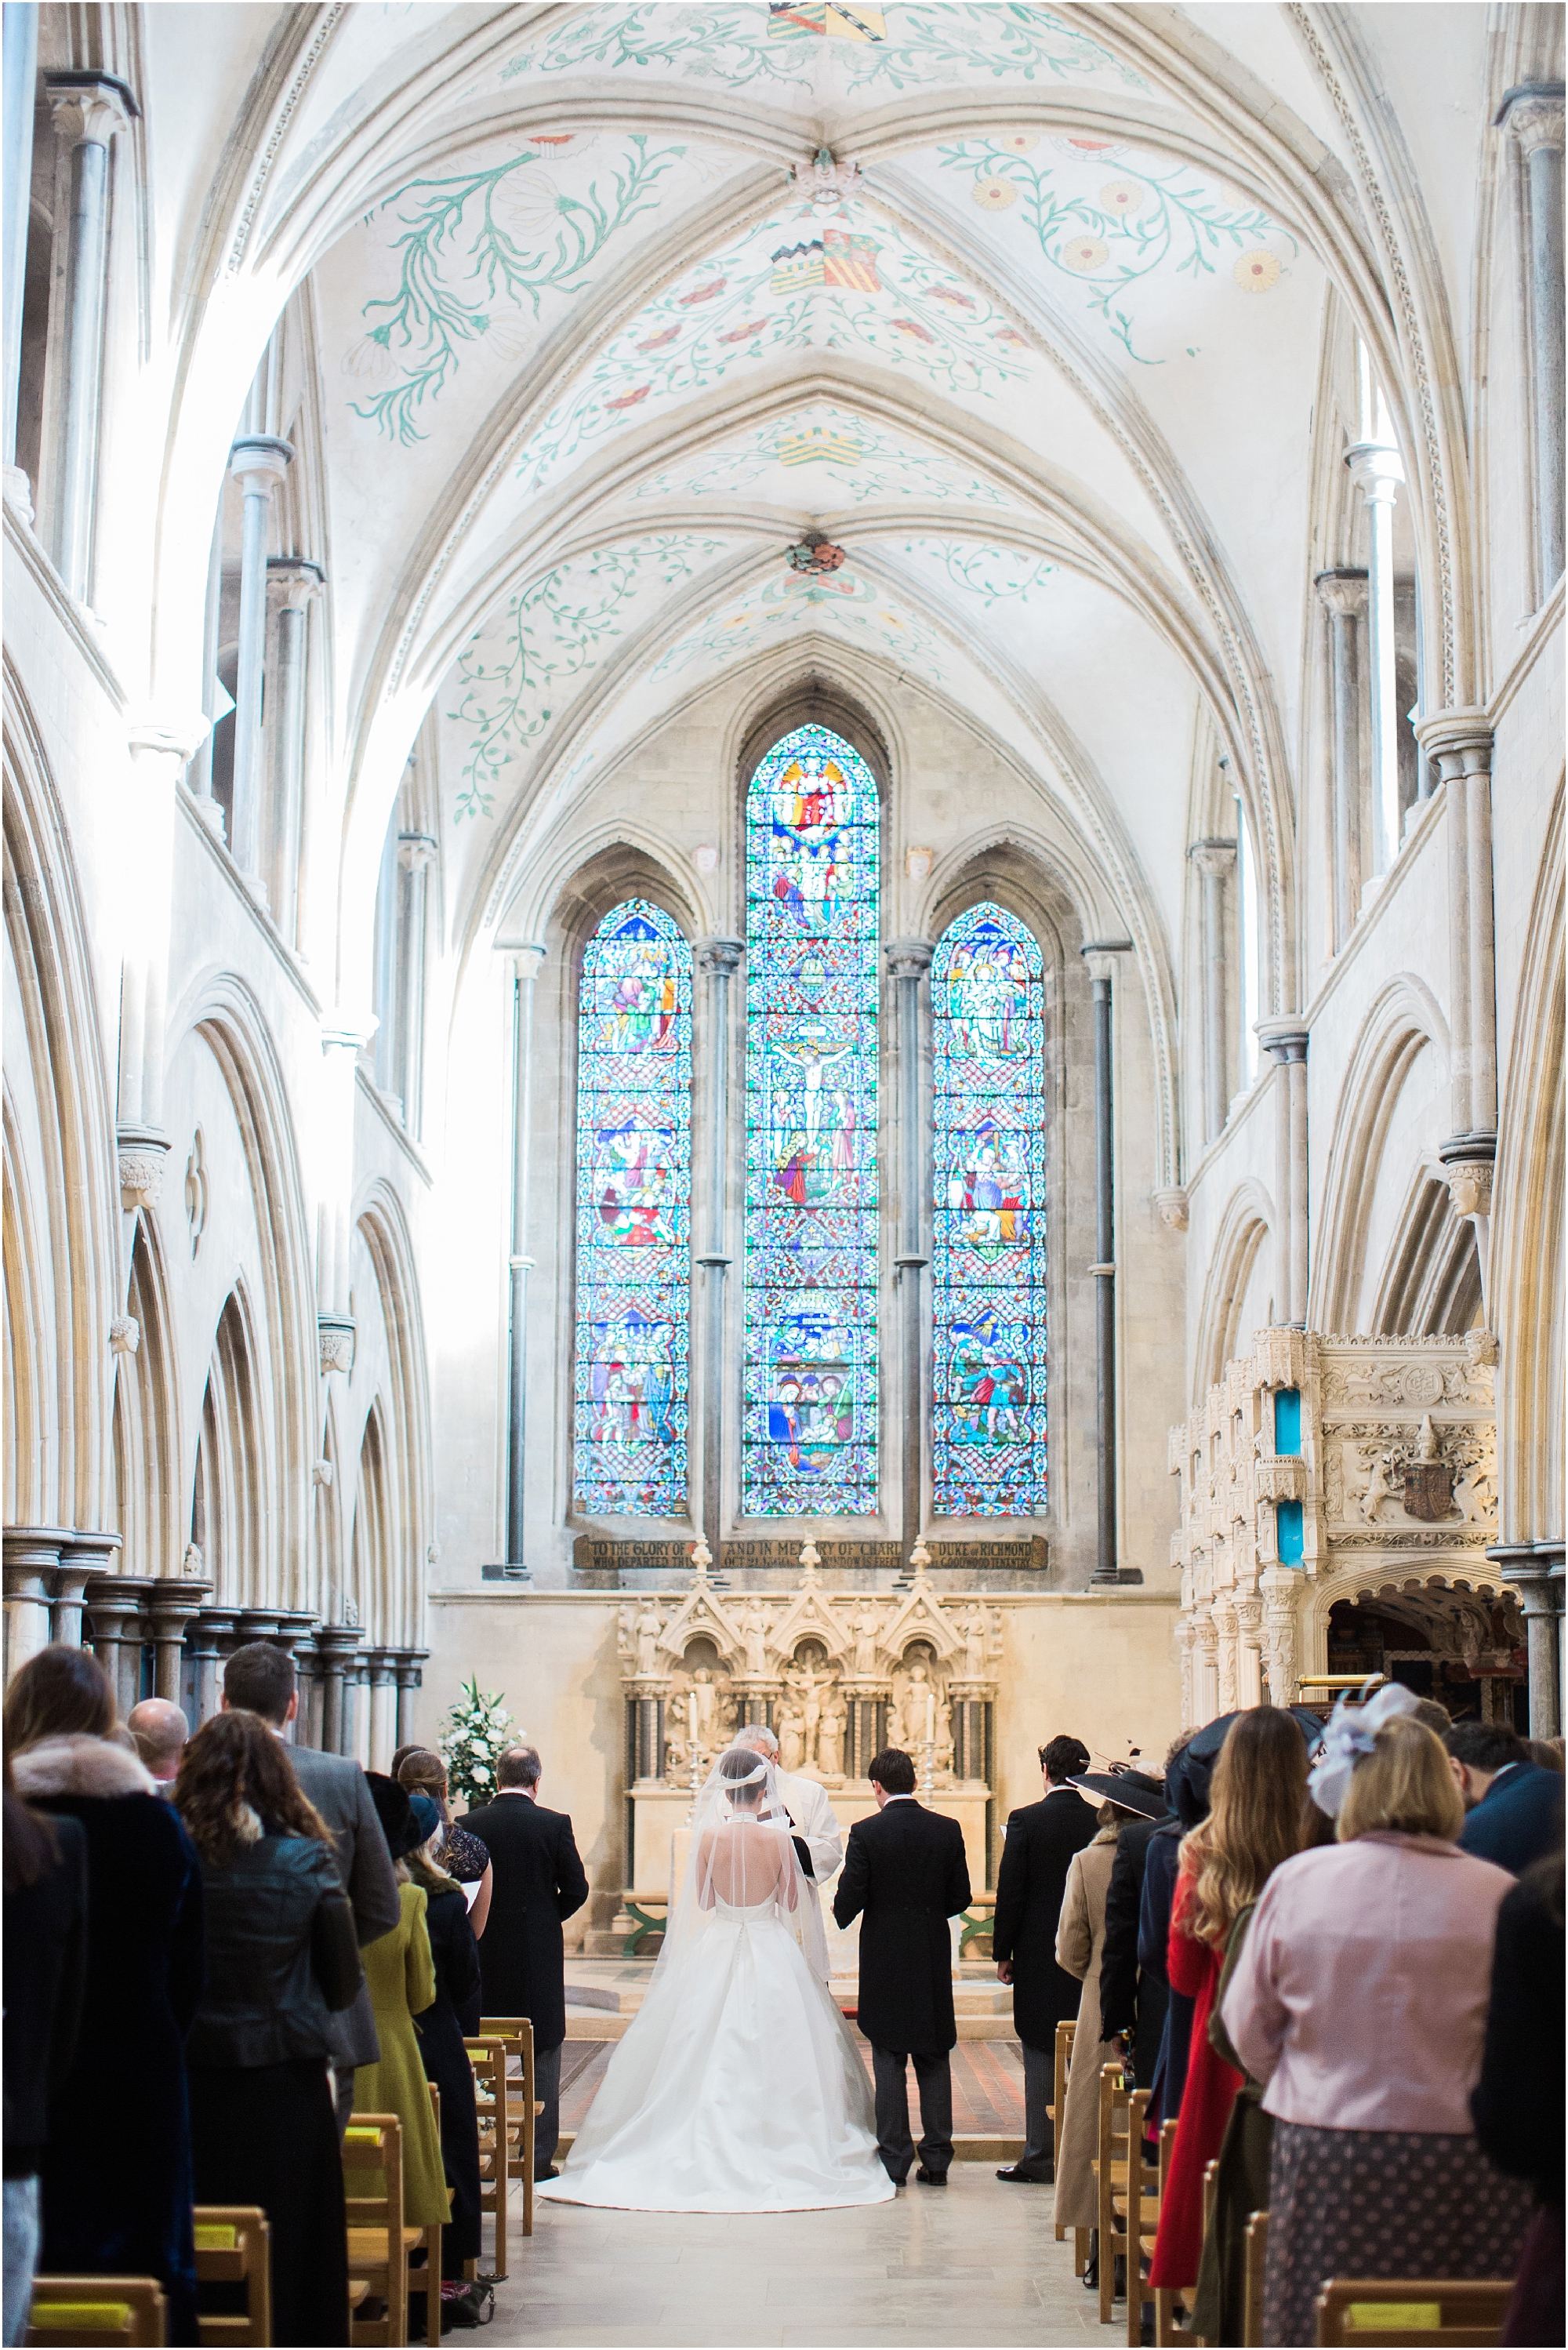 Bride and groom during wedding ceremony at altar of Boxgrove Priory